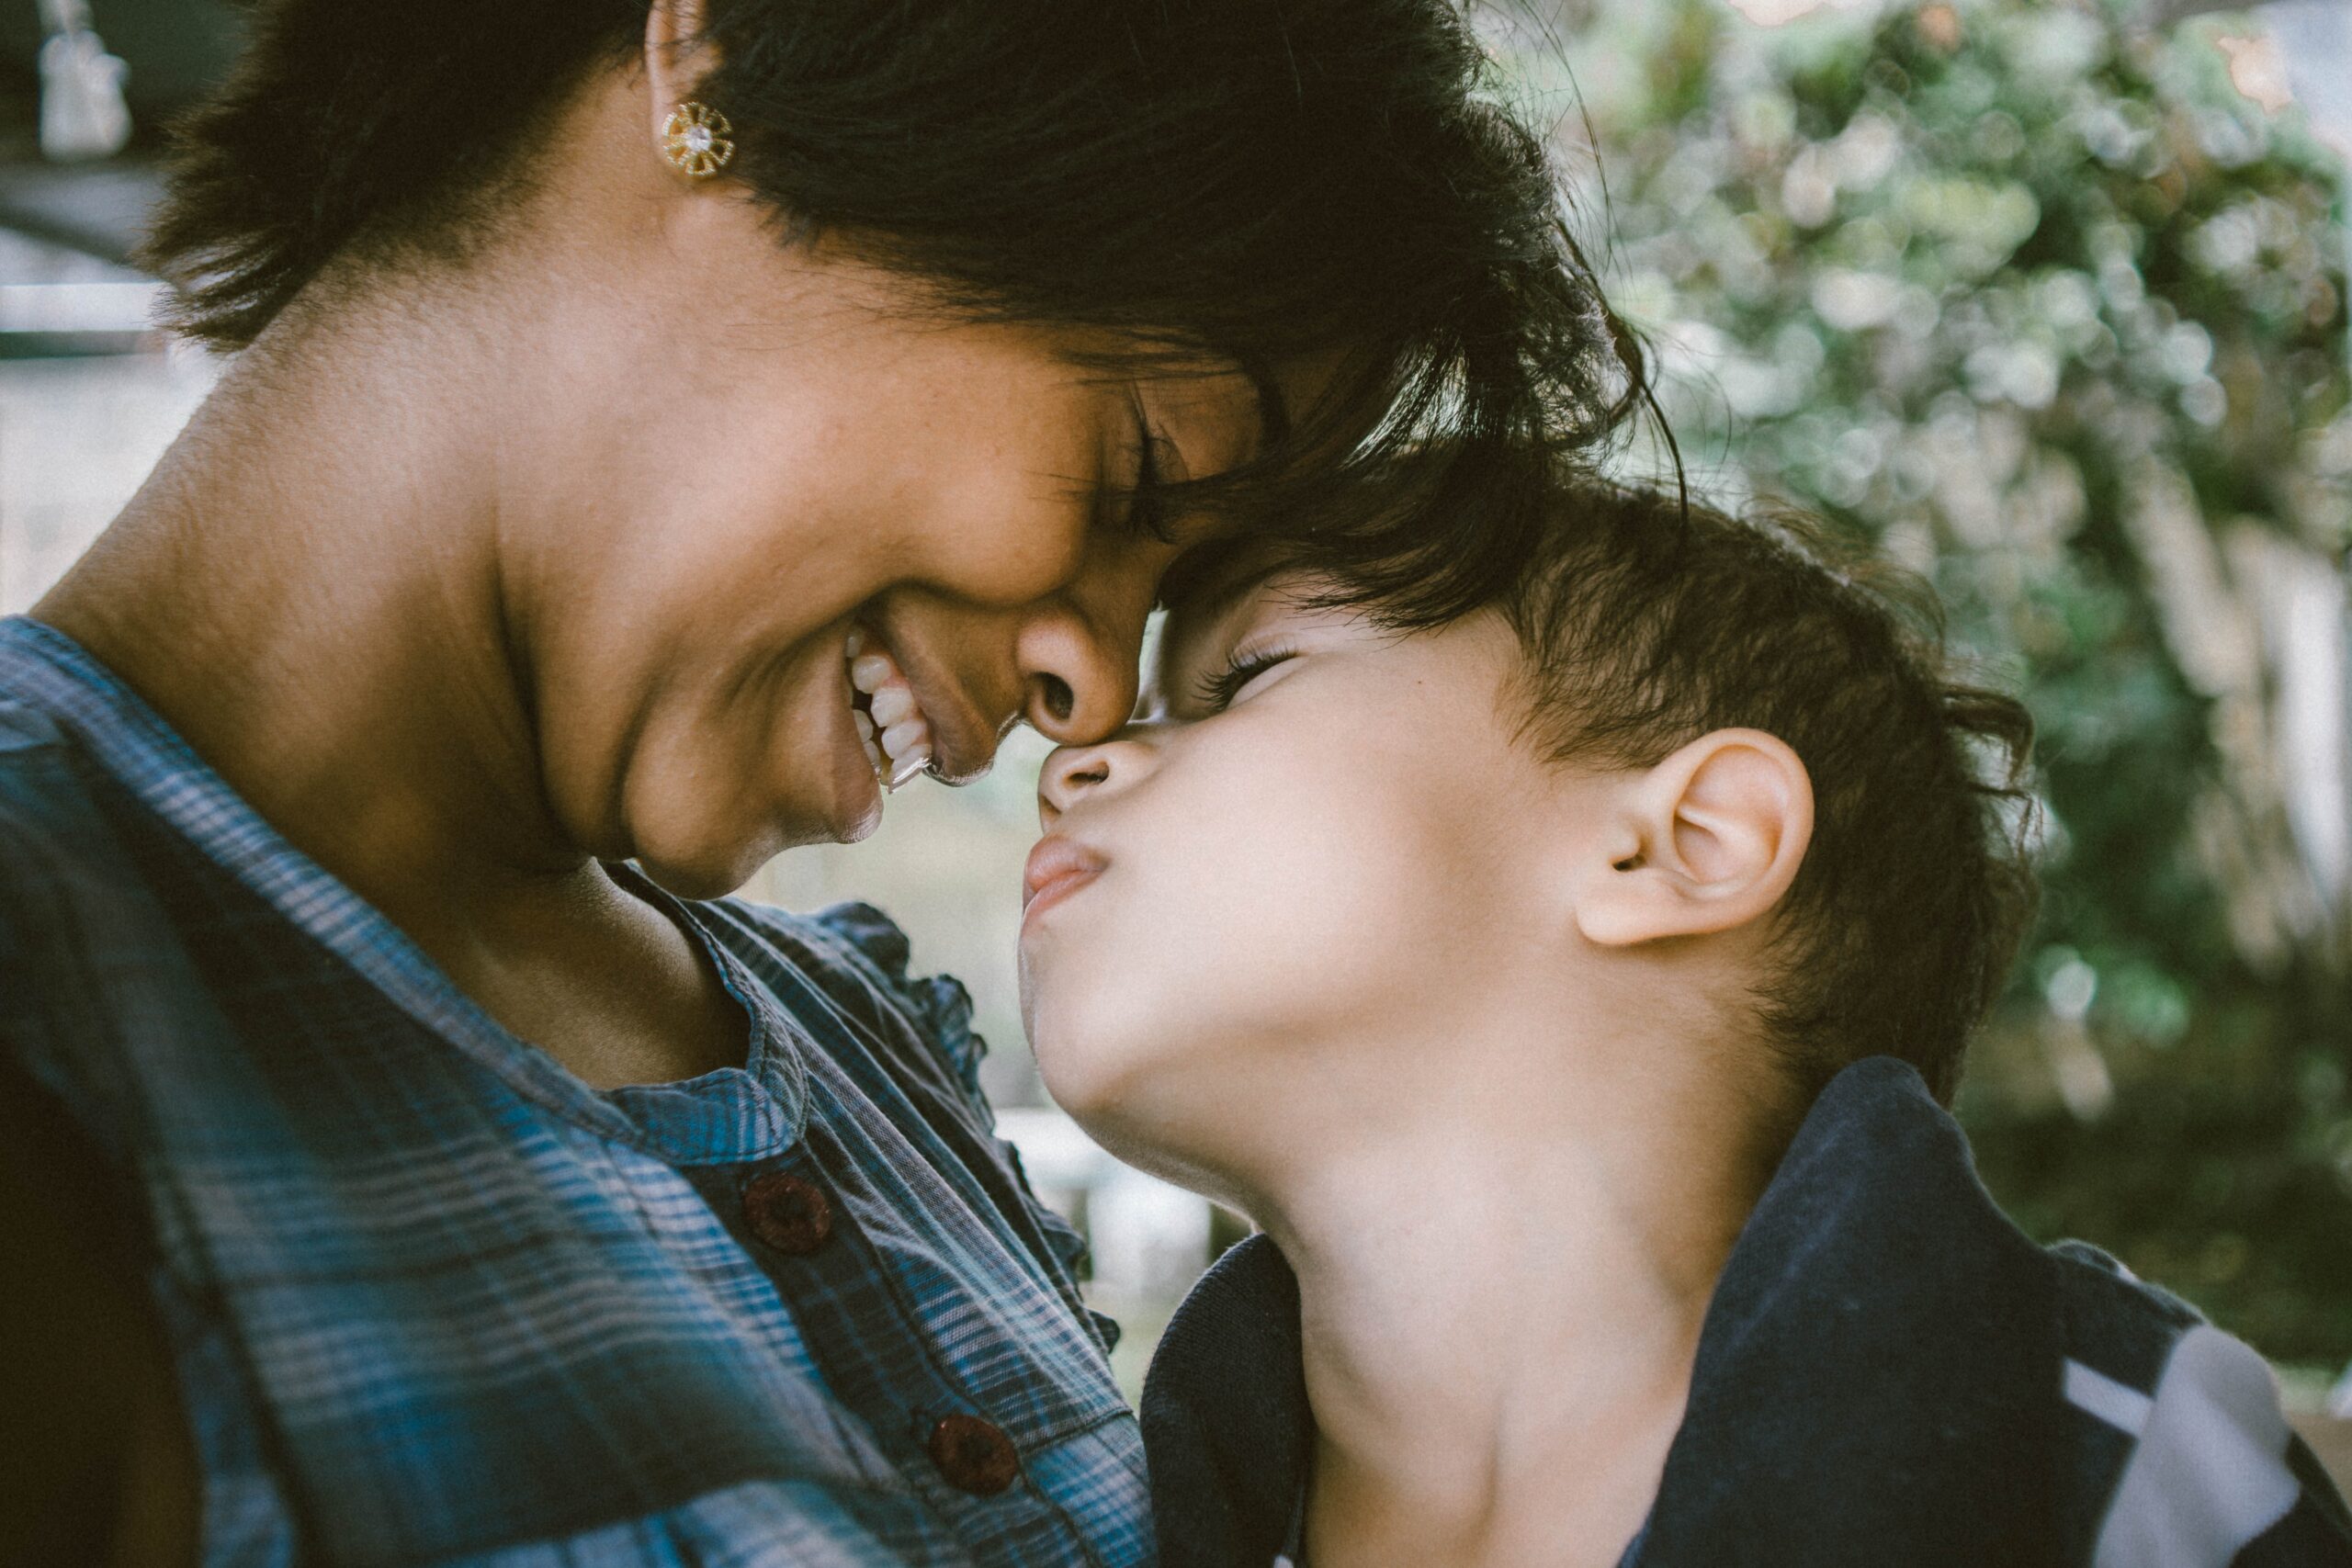 Keys to Successful Parenting: Compassion, Awareness, Respect, and Empathy